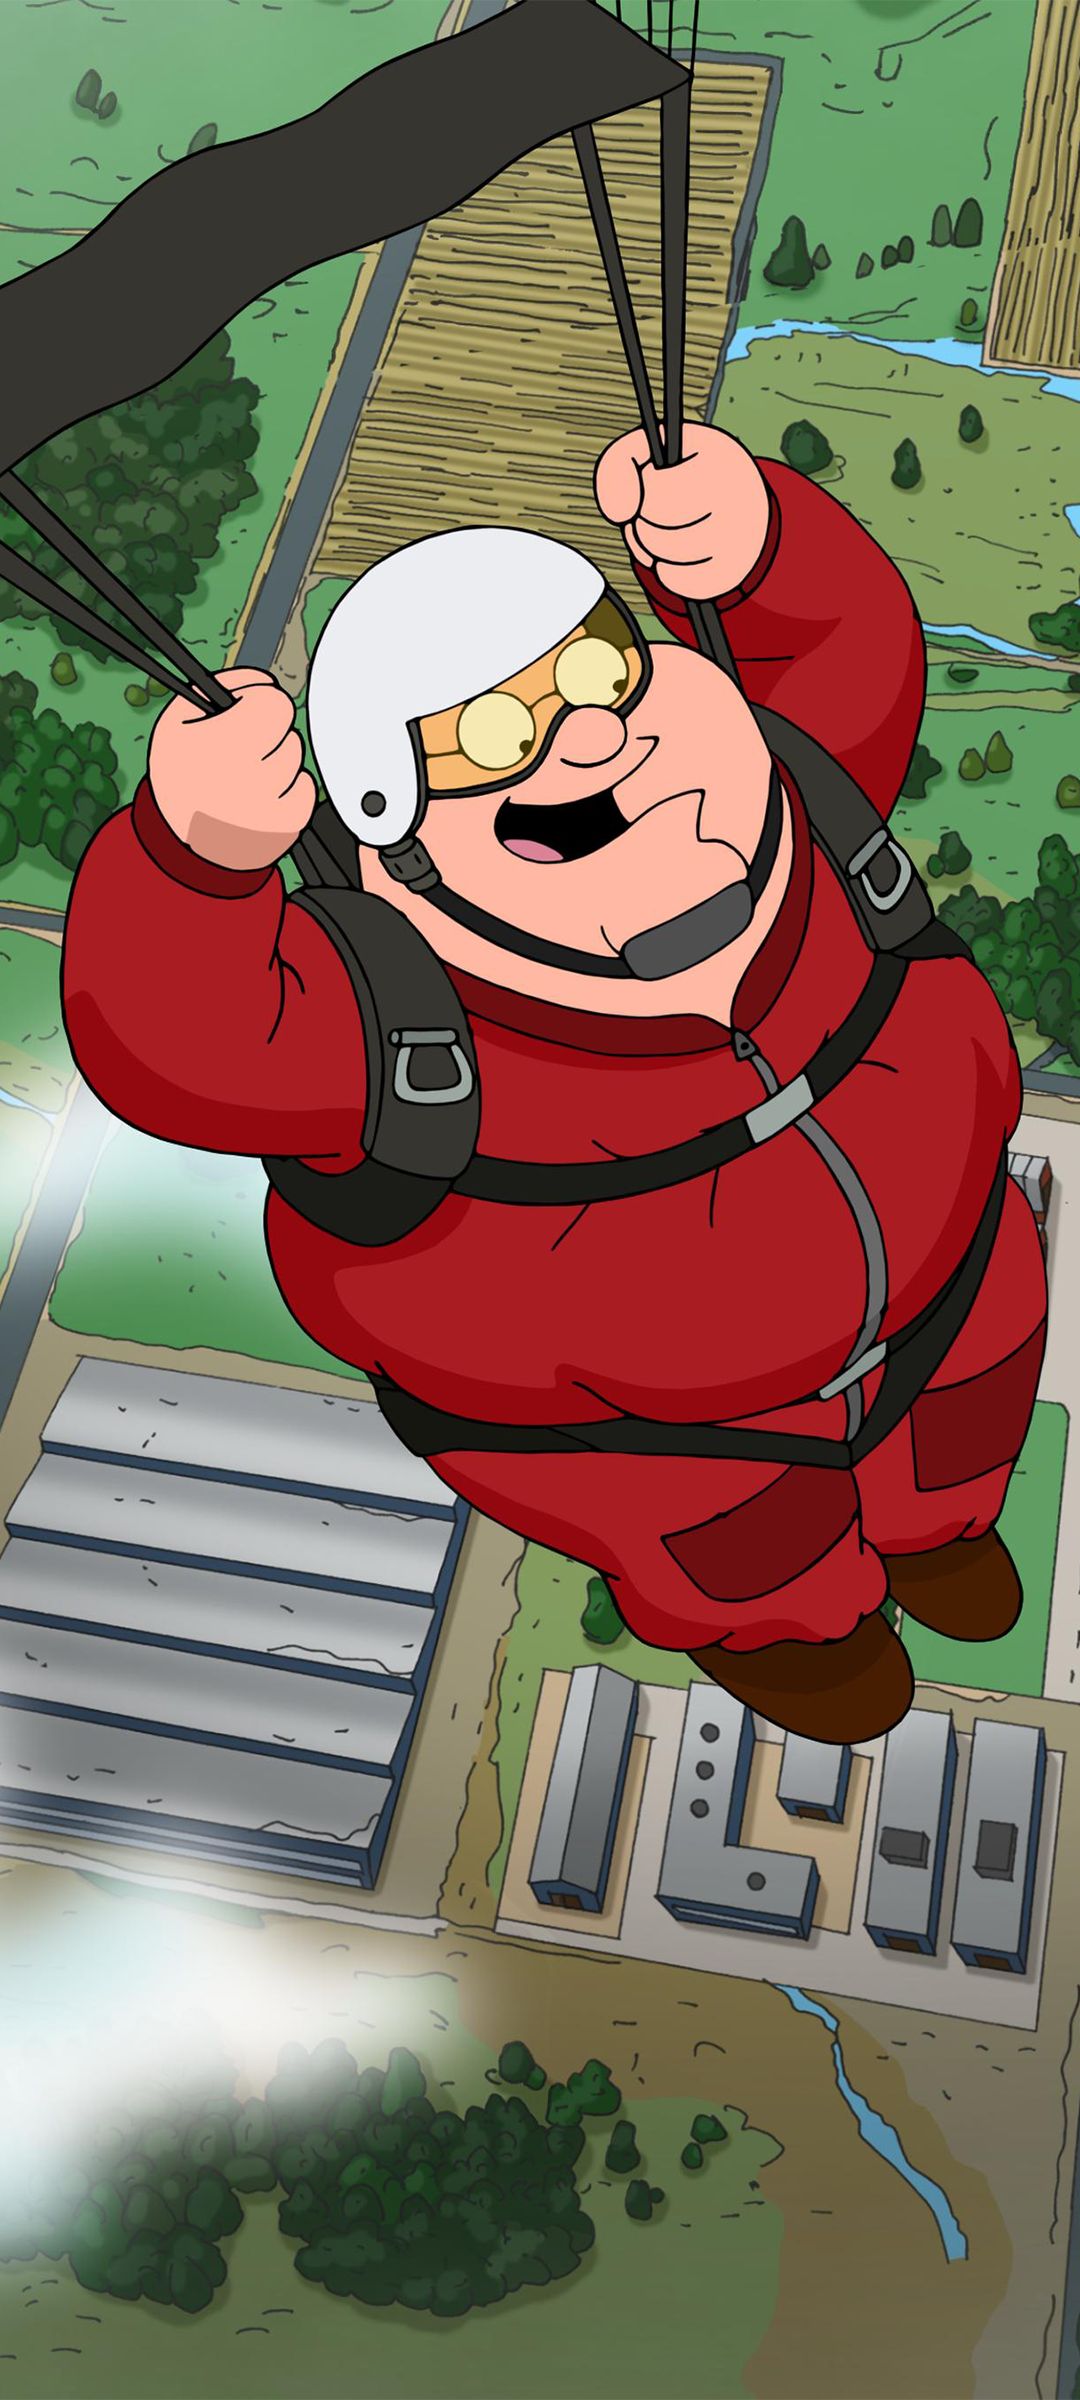 peter griffin, tv show, family guy iphone wallpaper